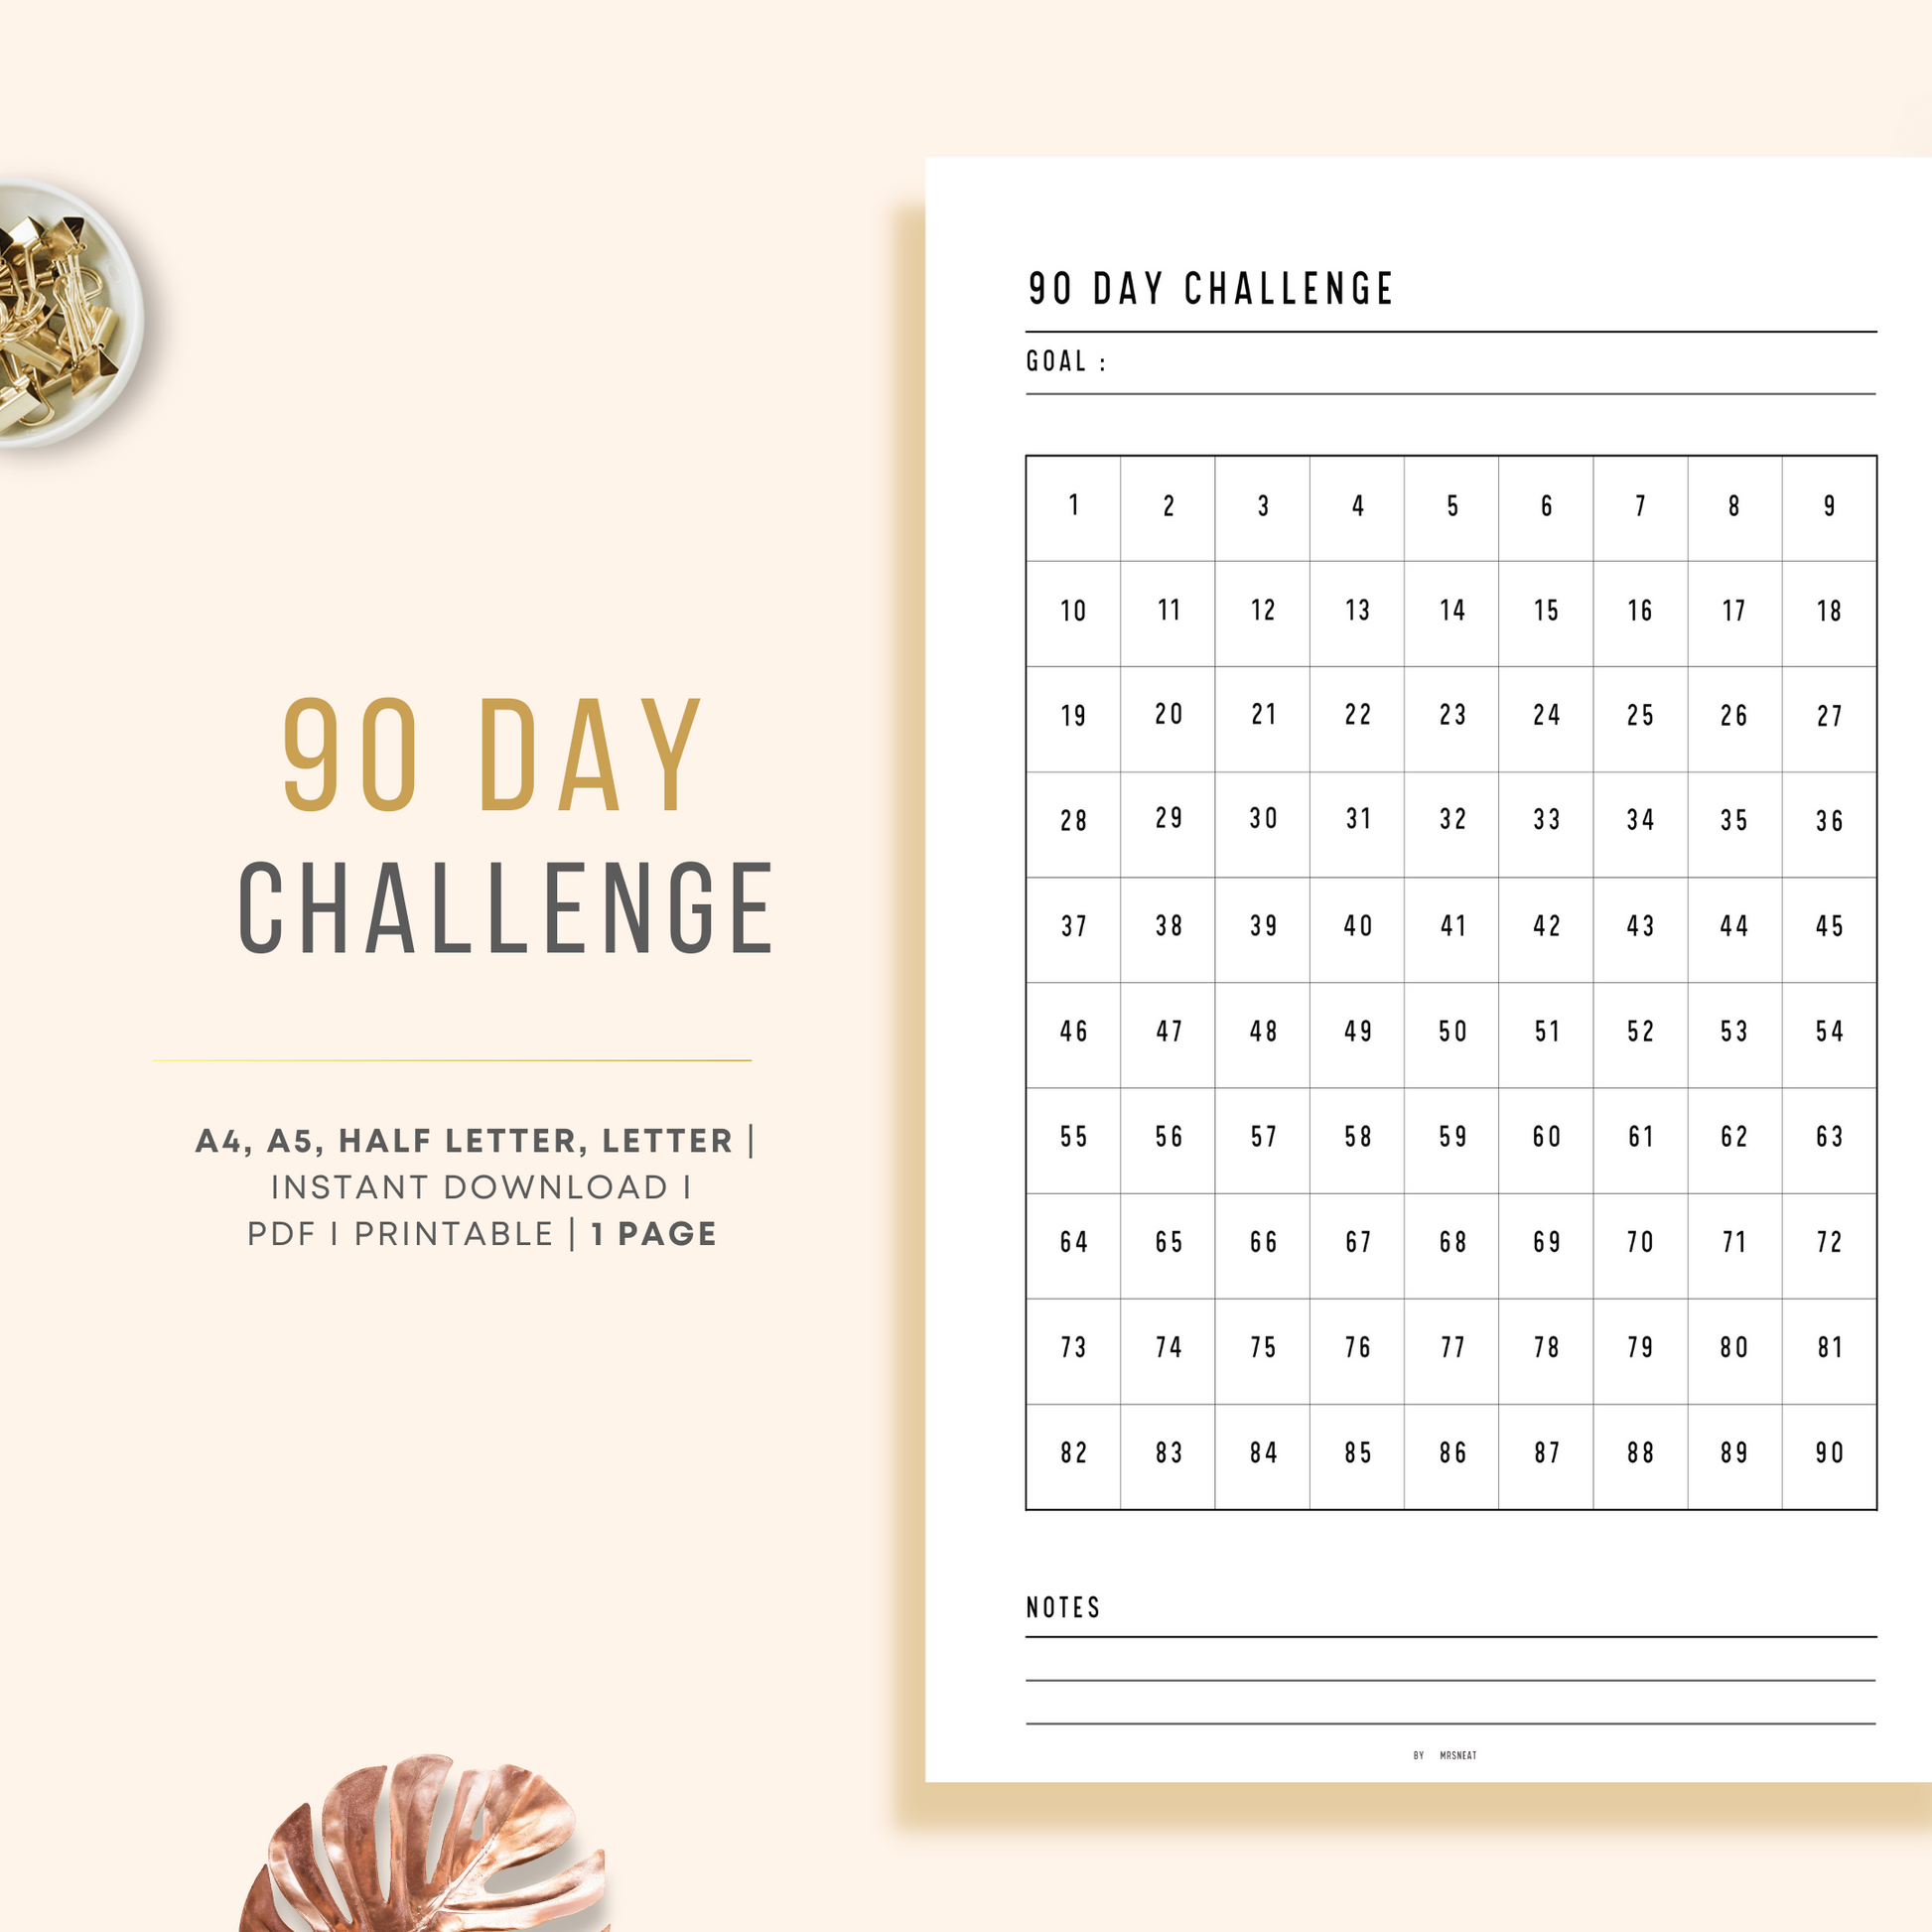 Minimalist and Clean 90 Day Challenge Tracker Planner Printable